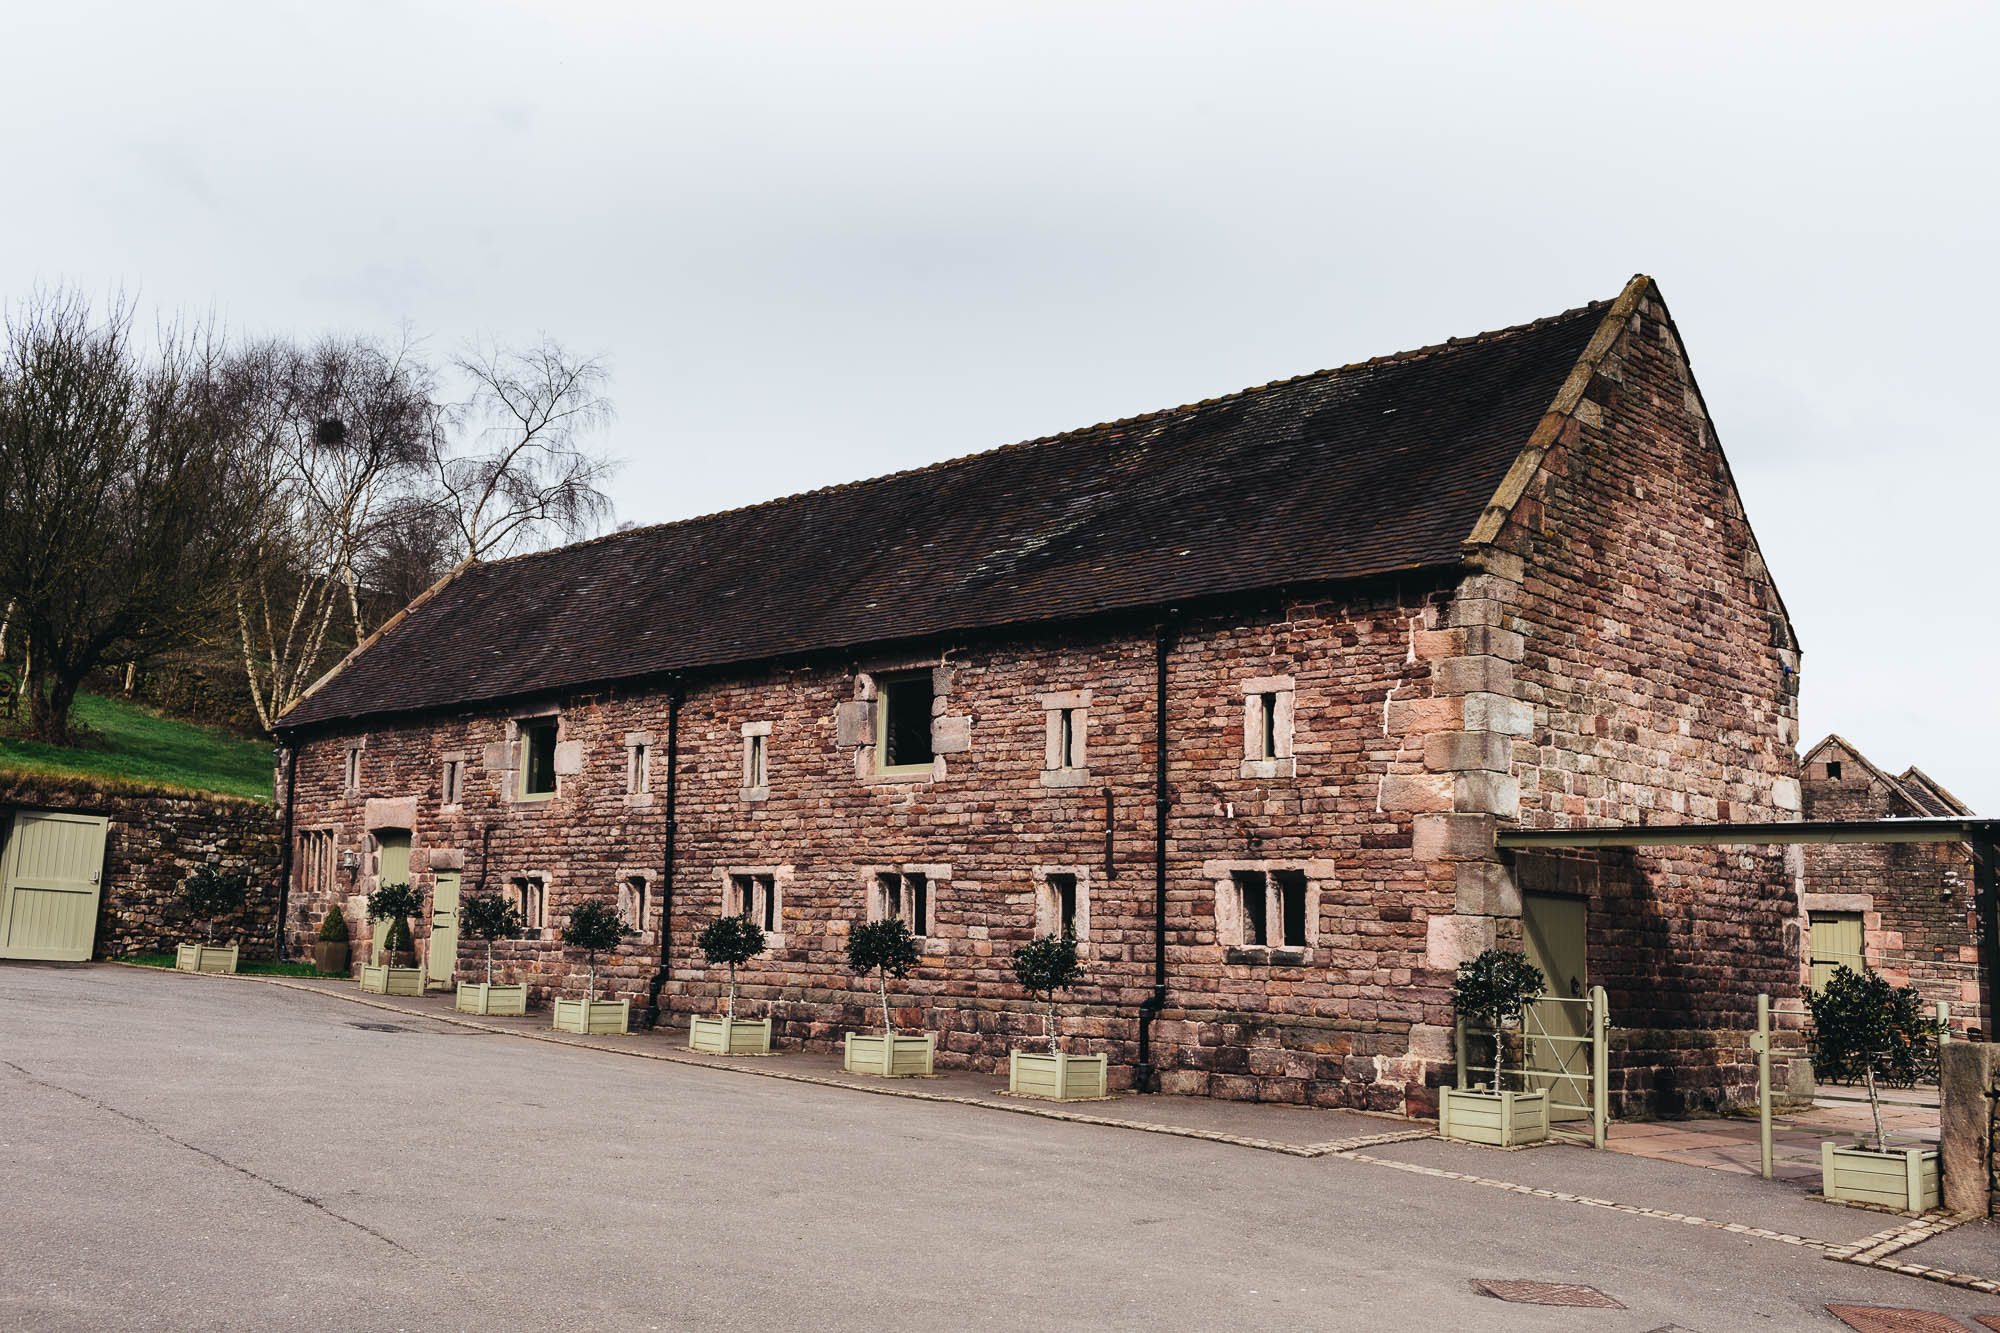 External shot of The Ashes Barn in Staffordshire